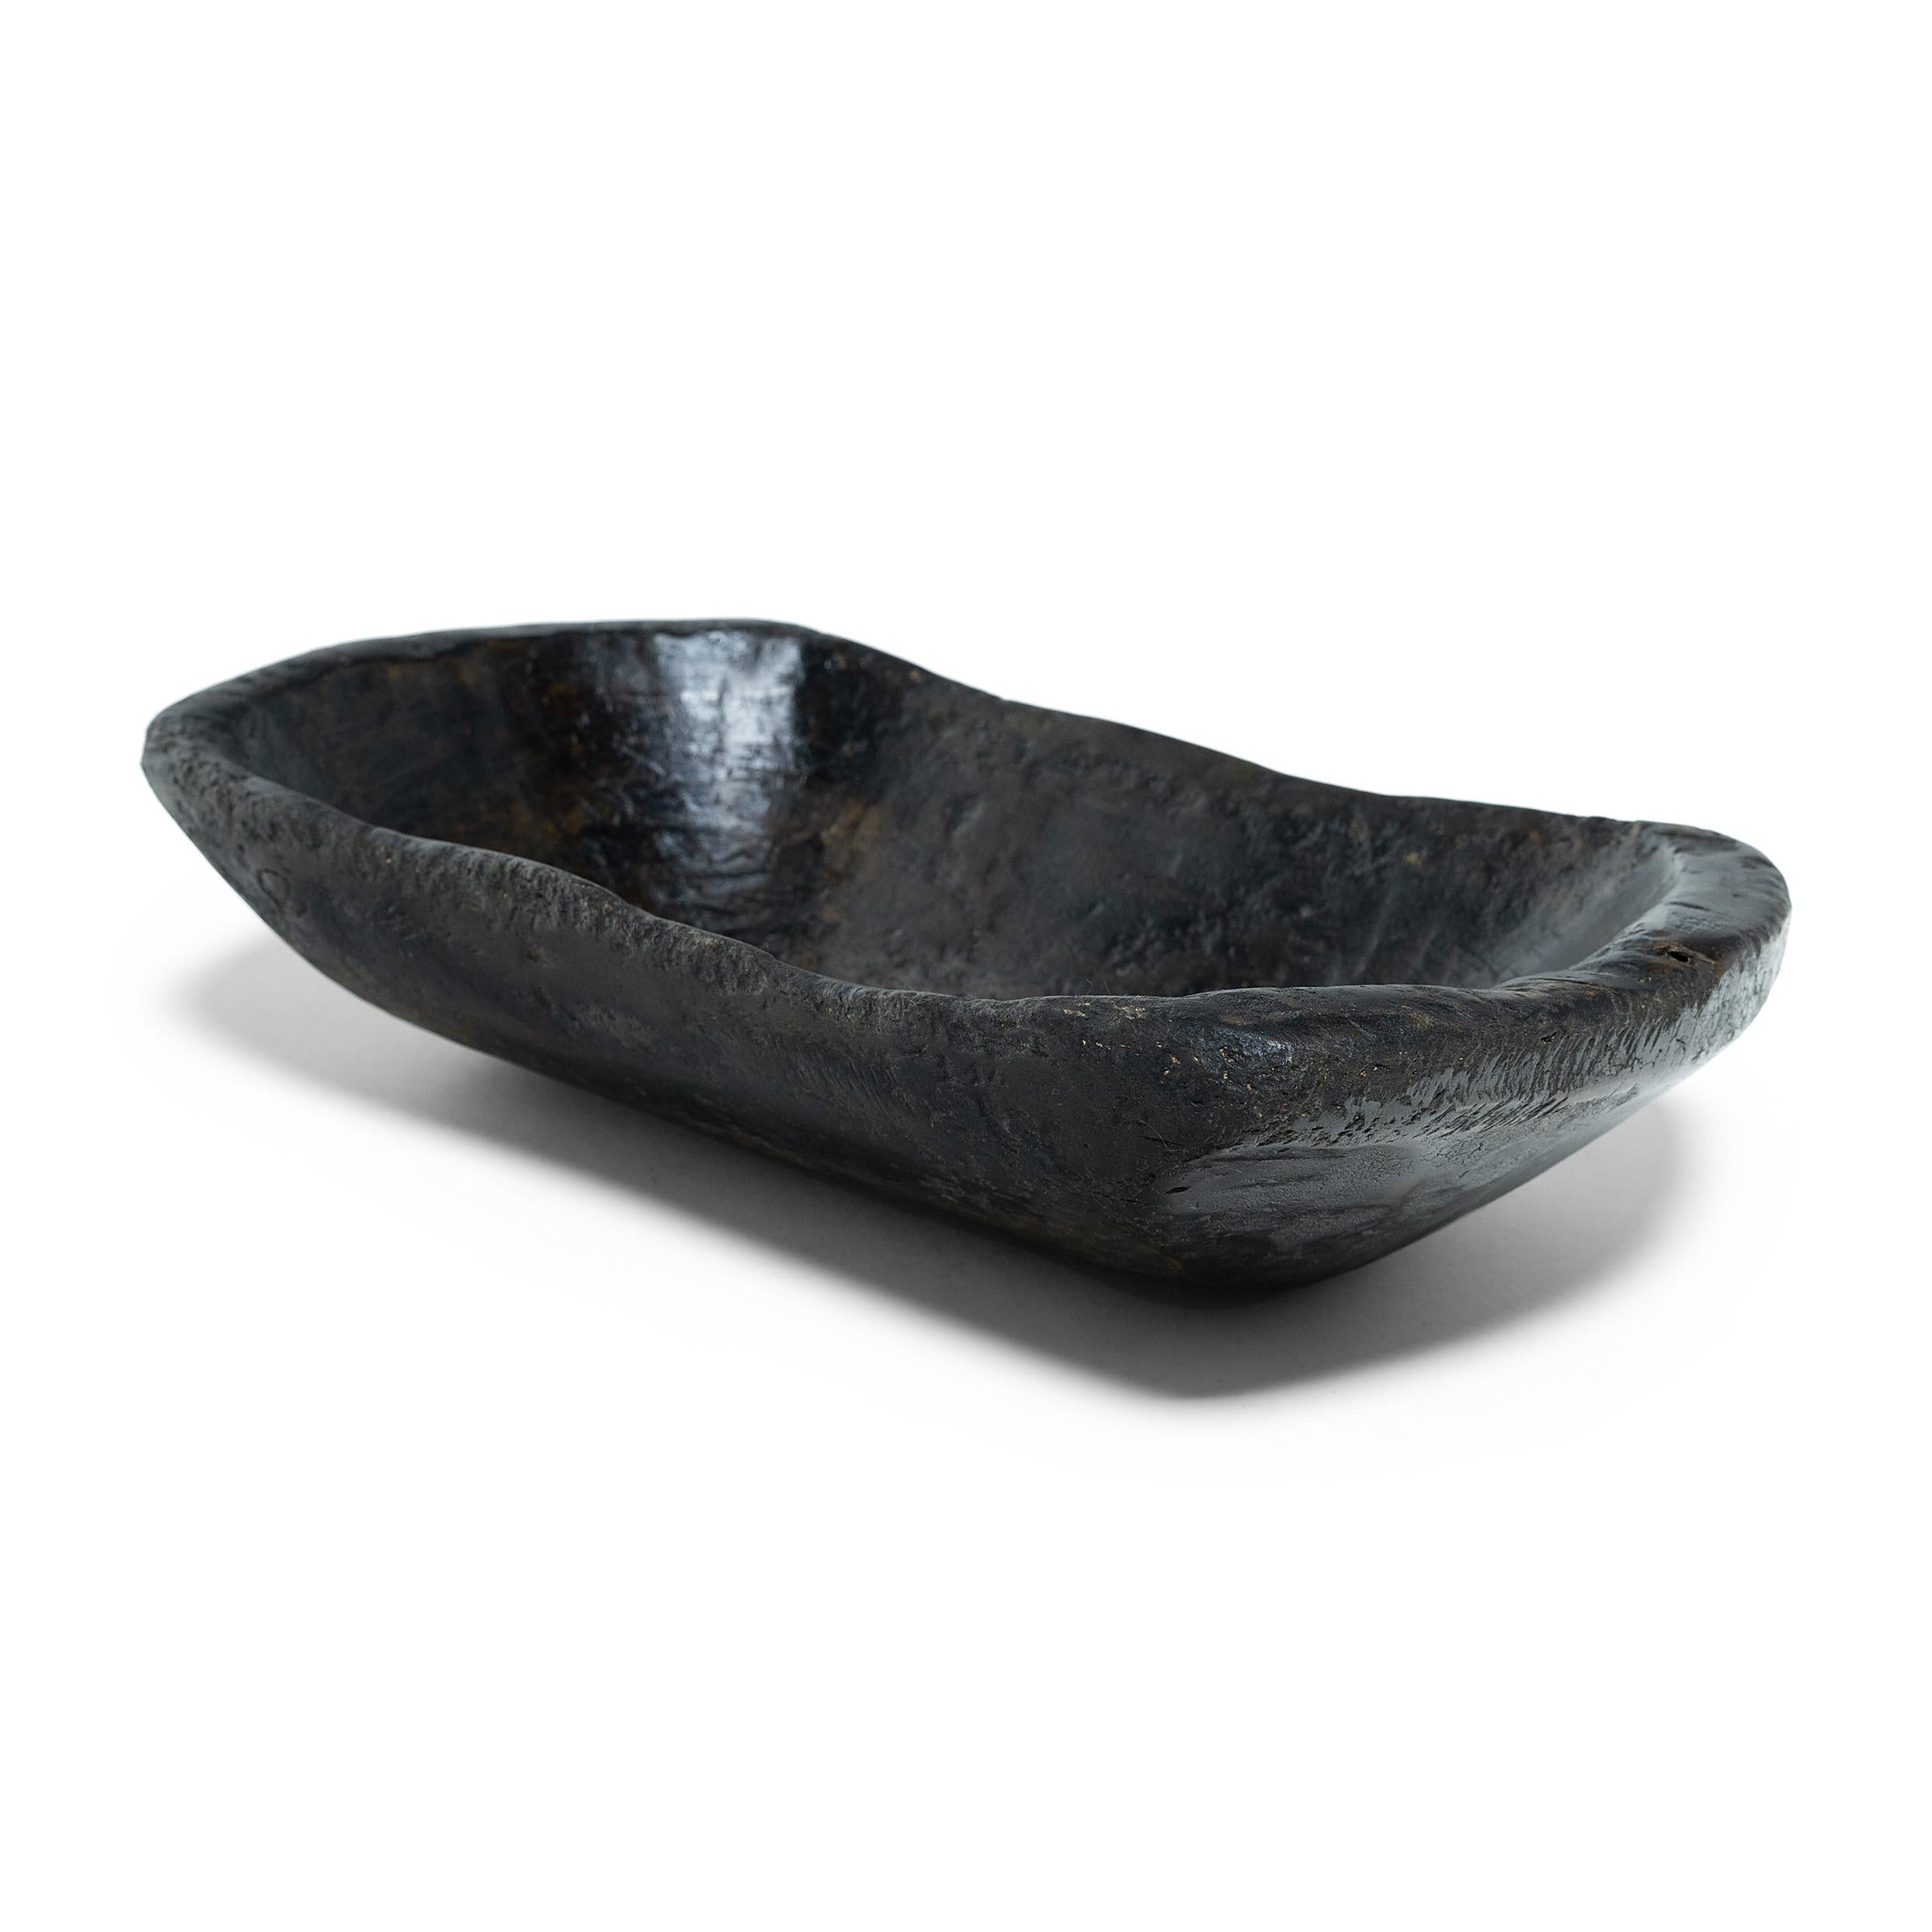 This hand-carved wooden tray from northern China charms with rustic texture and simple form. Years of use have rounded the edges and imparted a well-worn, wabi sabi texture. Originally used in a provincial farm or kitchen, the tray brings a touch of